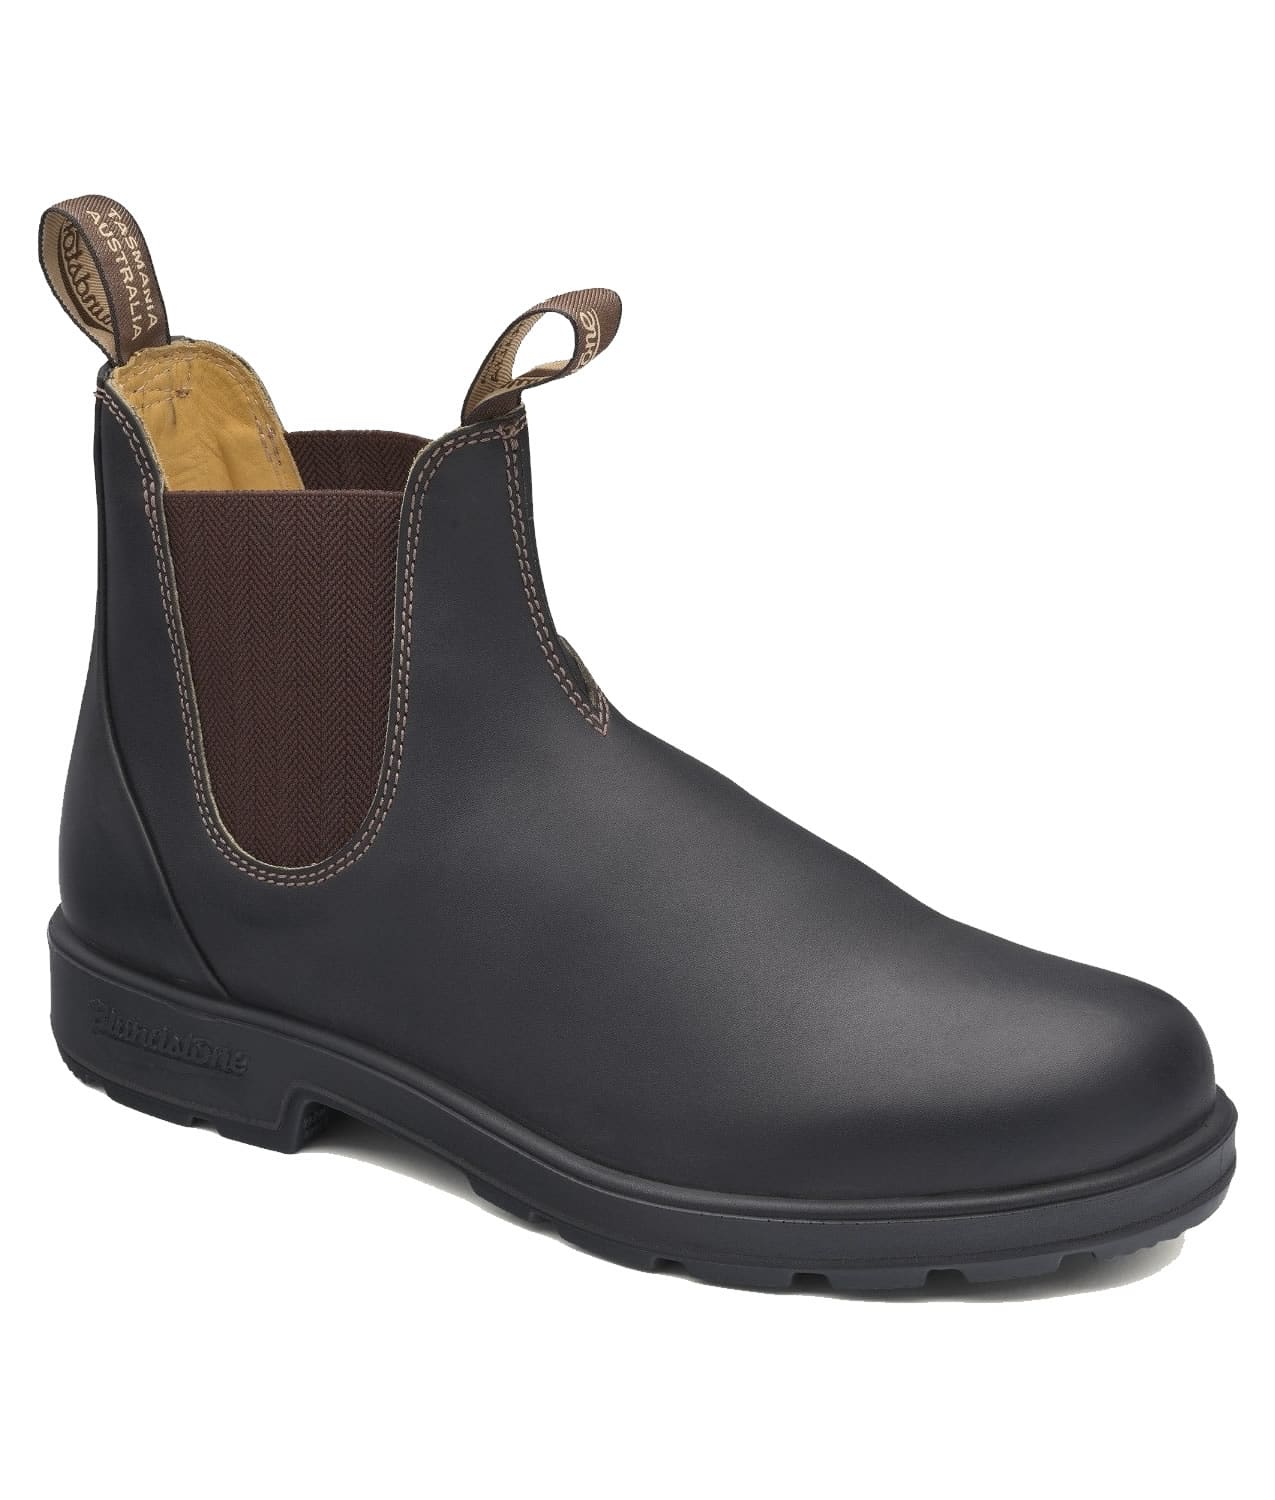 Blundstone Brown Premium Leather Work Boot - Style 600